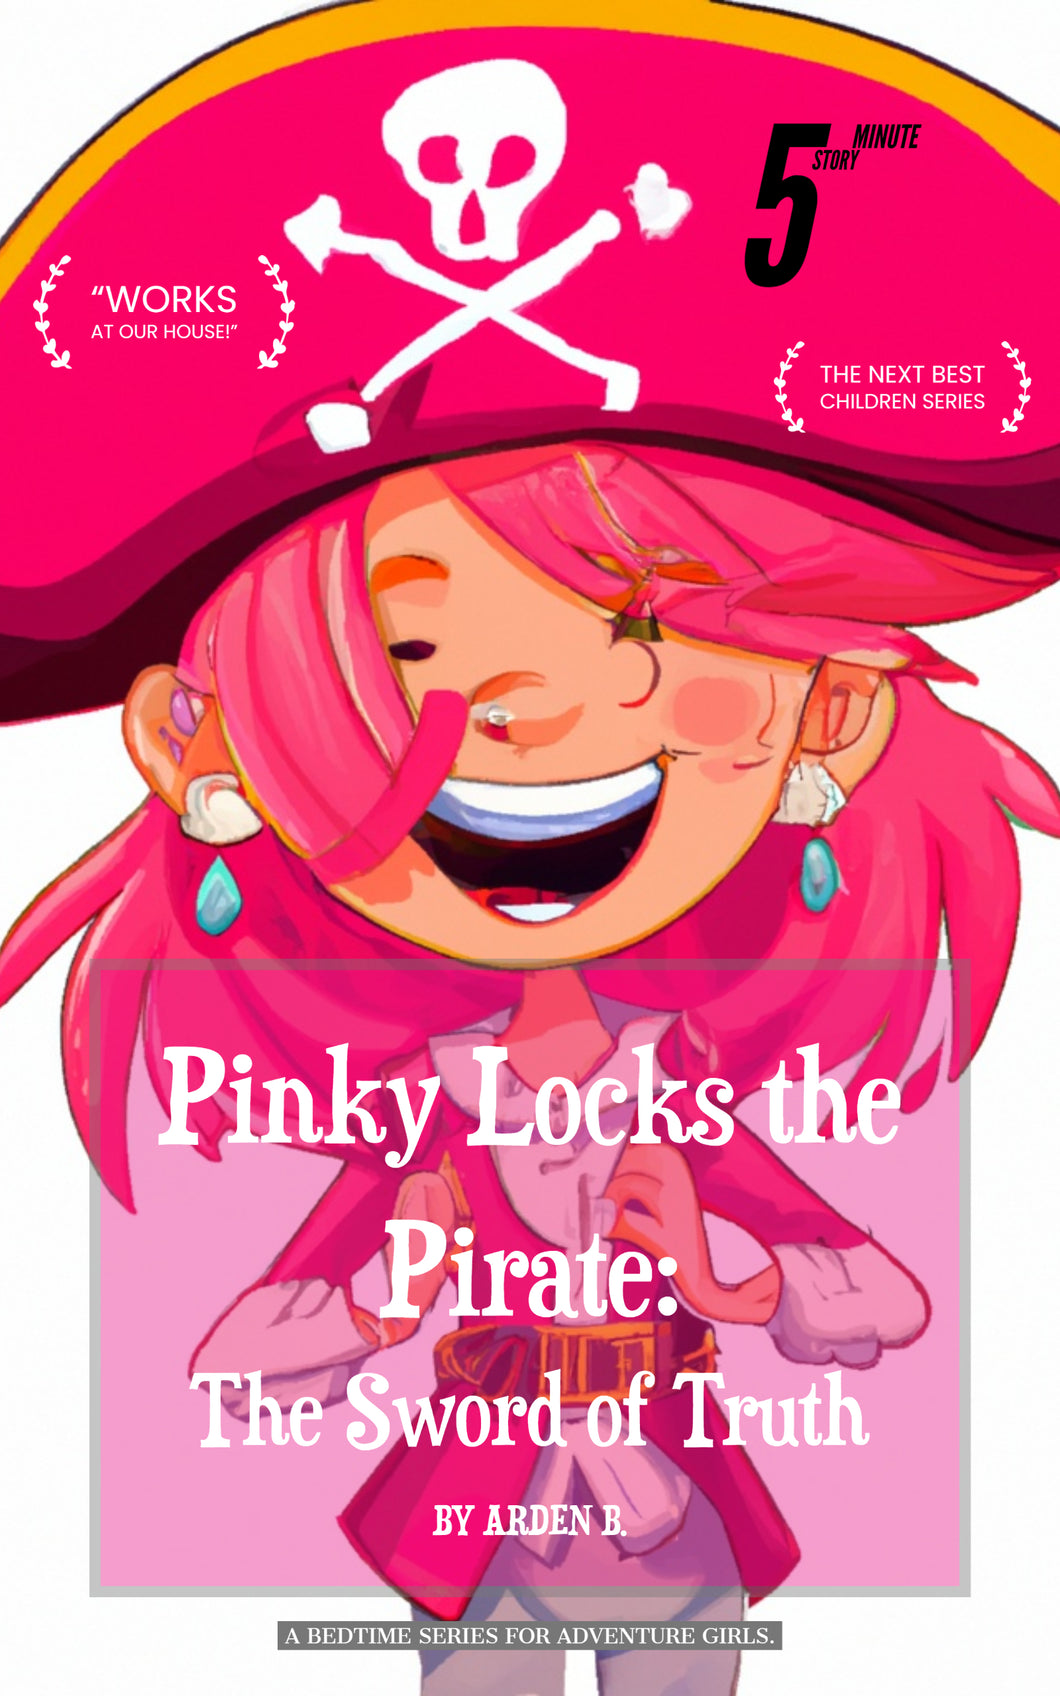 Pinky Locks the Pirate: The Sword of Truth